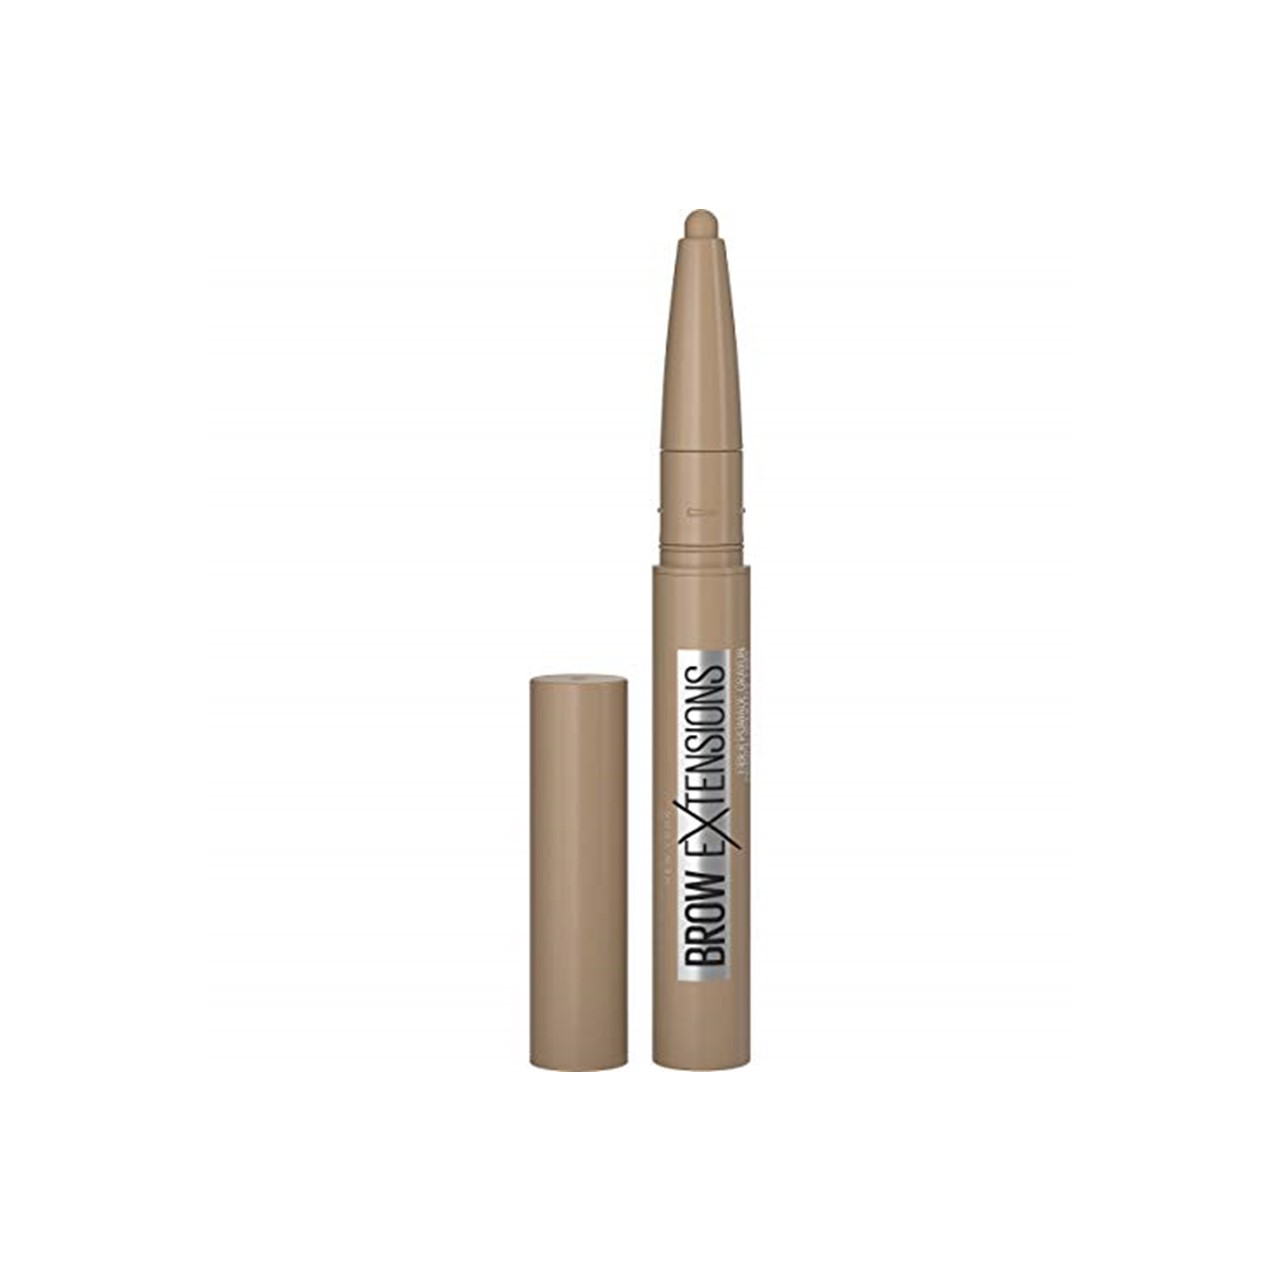 Maybelline Brow Extensions Fiber Pomade Crayon 01 Blonde 0.4g (0.01oz)